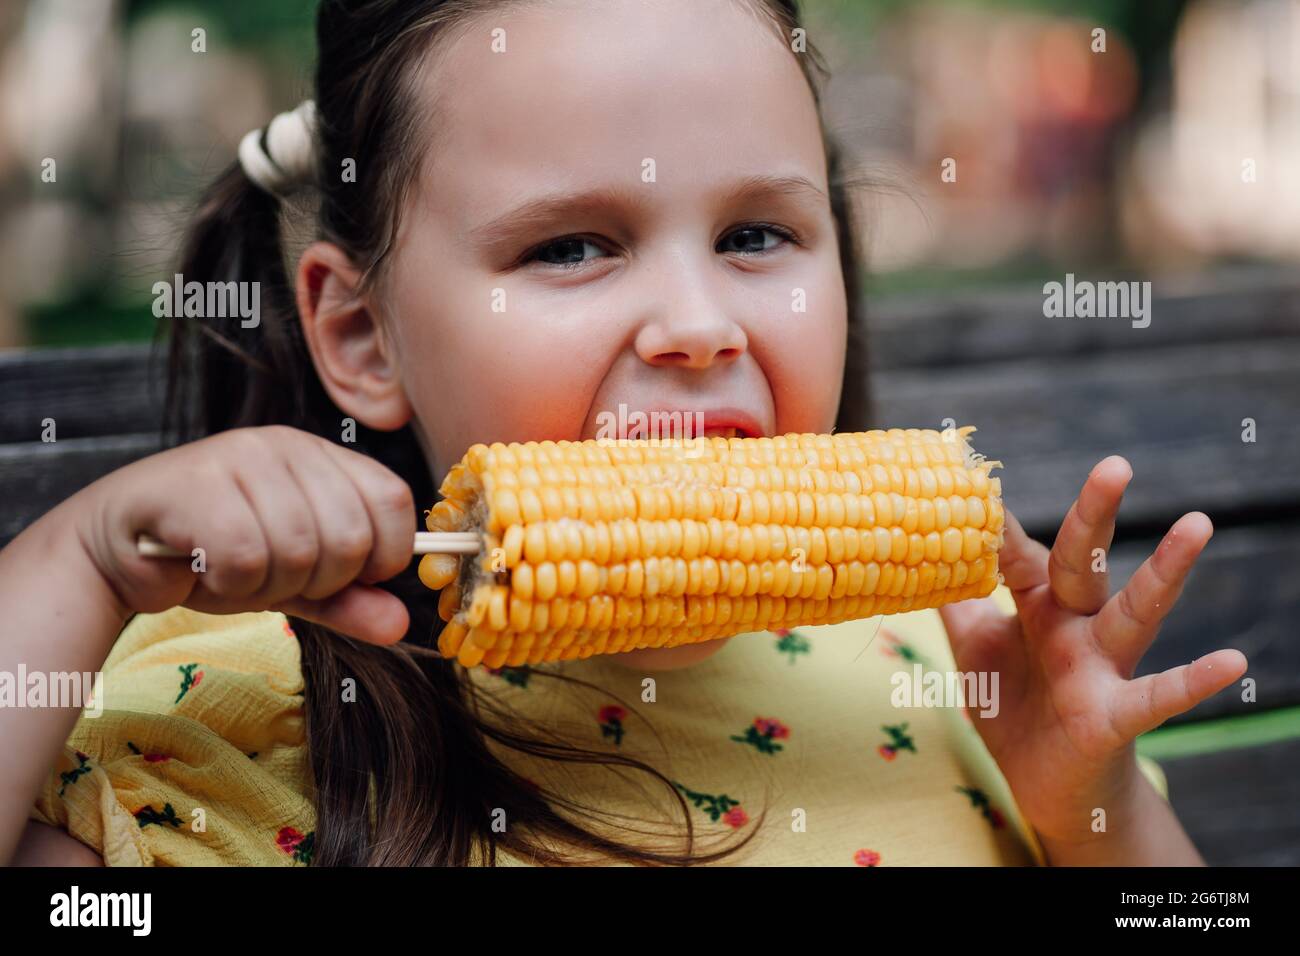 close-up portrait in detail of a girl biting sweet hot corn on a hiking trip in a summer green forest Stock Photo